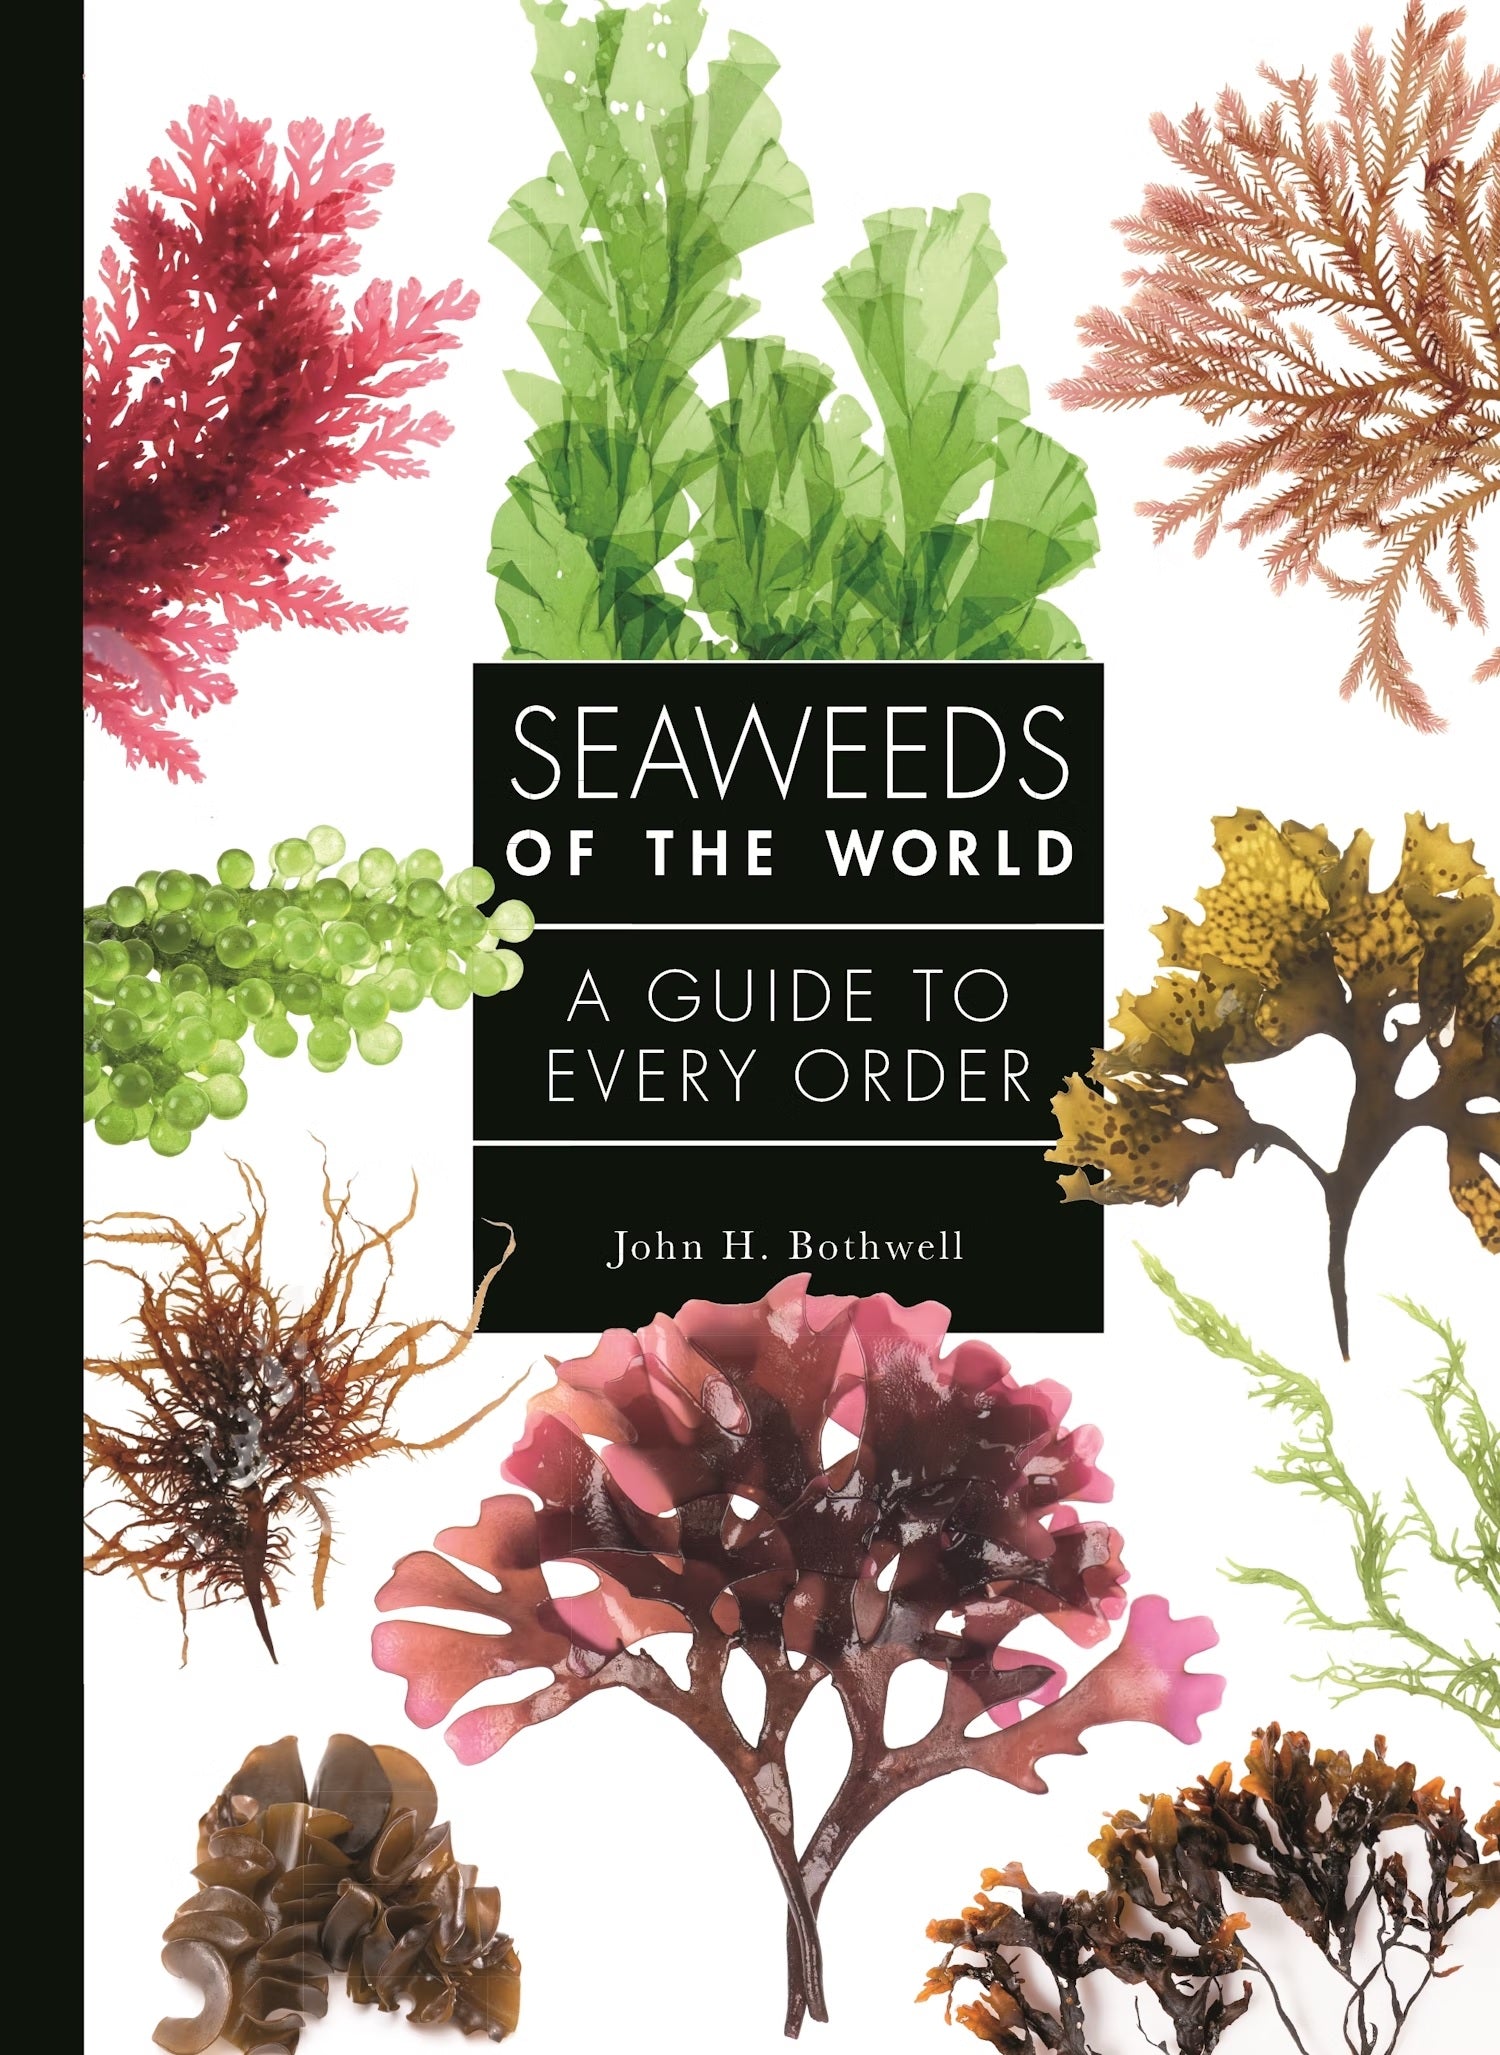 Seaweeds of the World: A Guide to Every Order